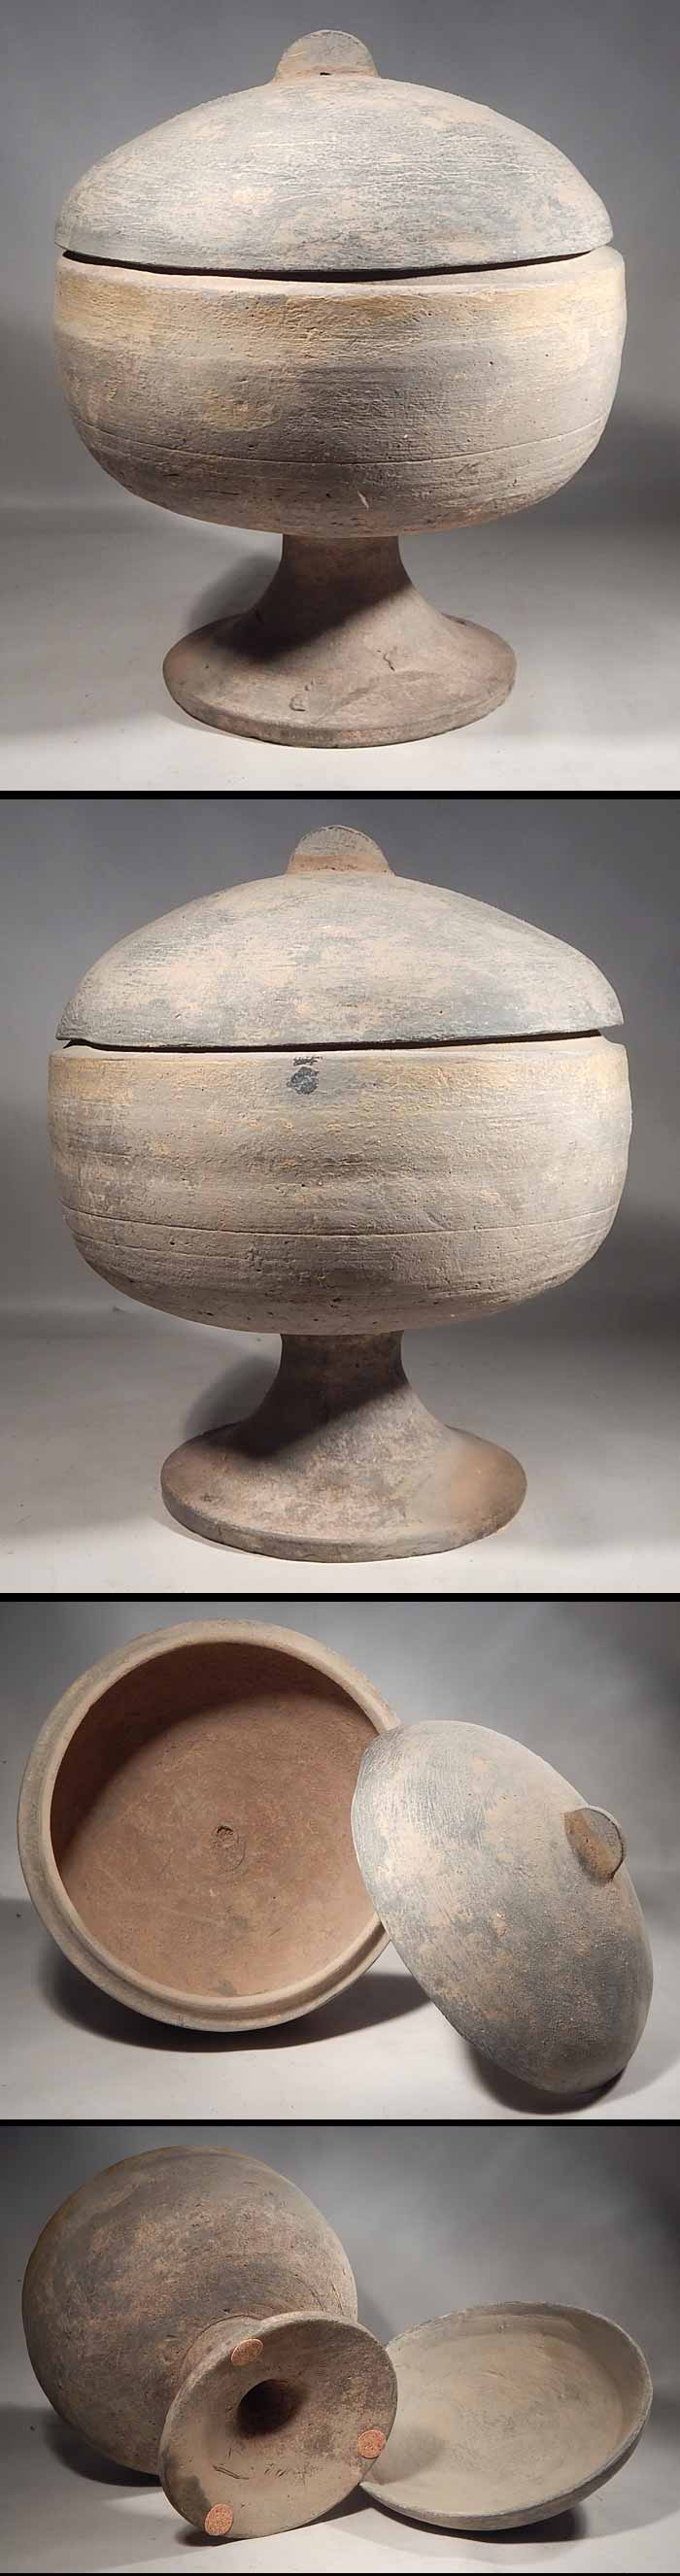 Han Dynasty Terracotta Pottery Peredstal Bowl with Cover Lid